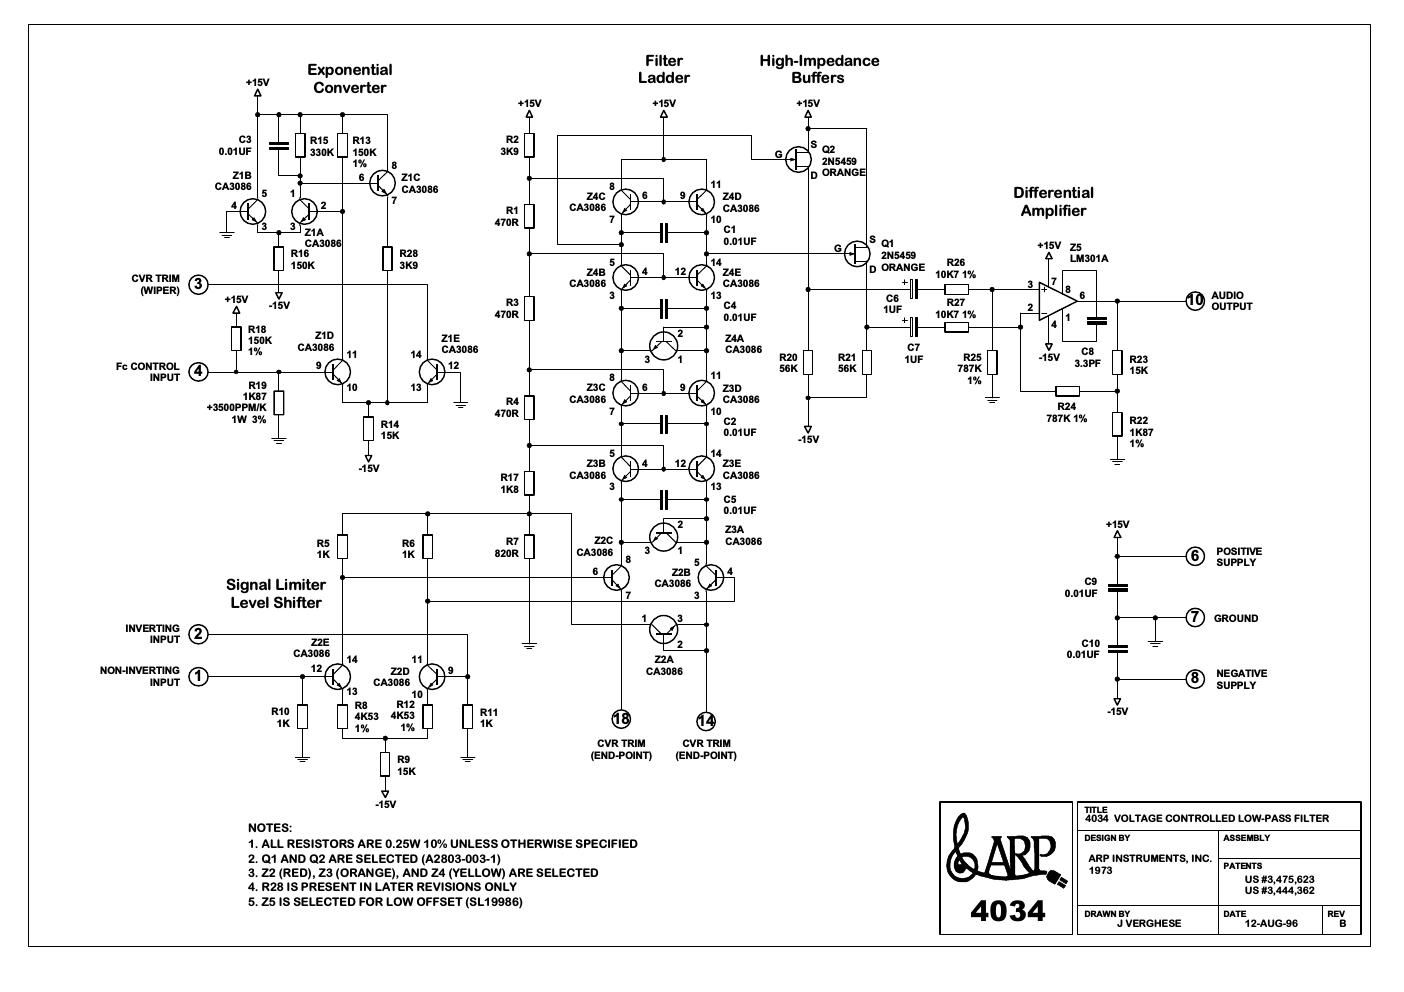 arp 4034 voltage controlled filter